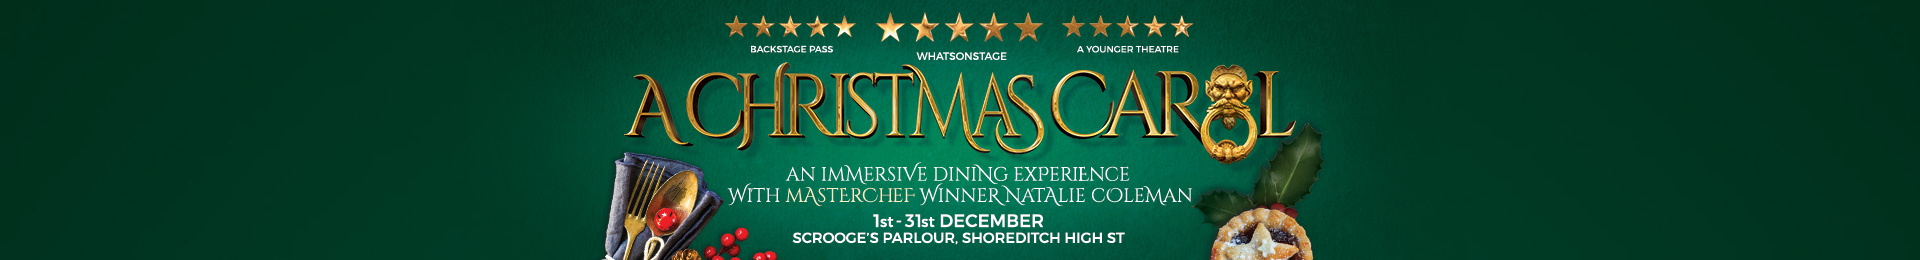 A Christmas Carol with Dinner by Natalie Coleman banner image